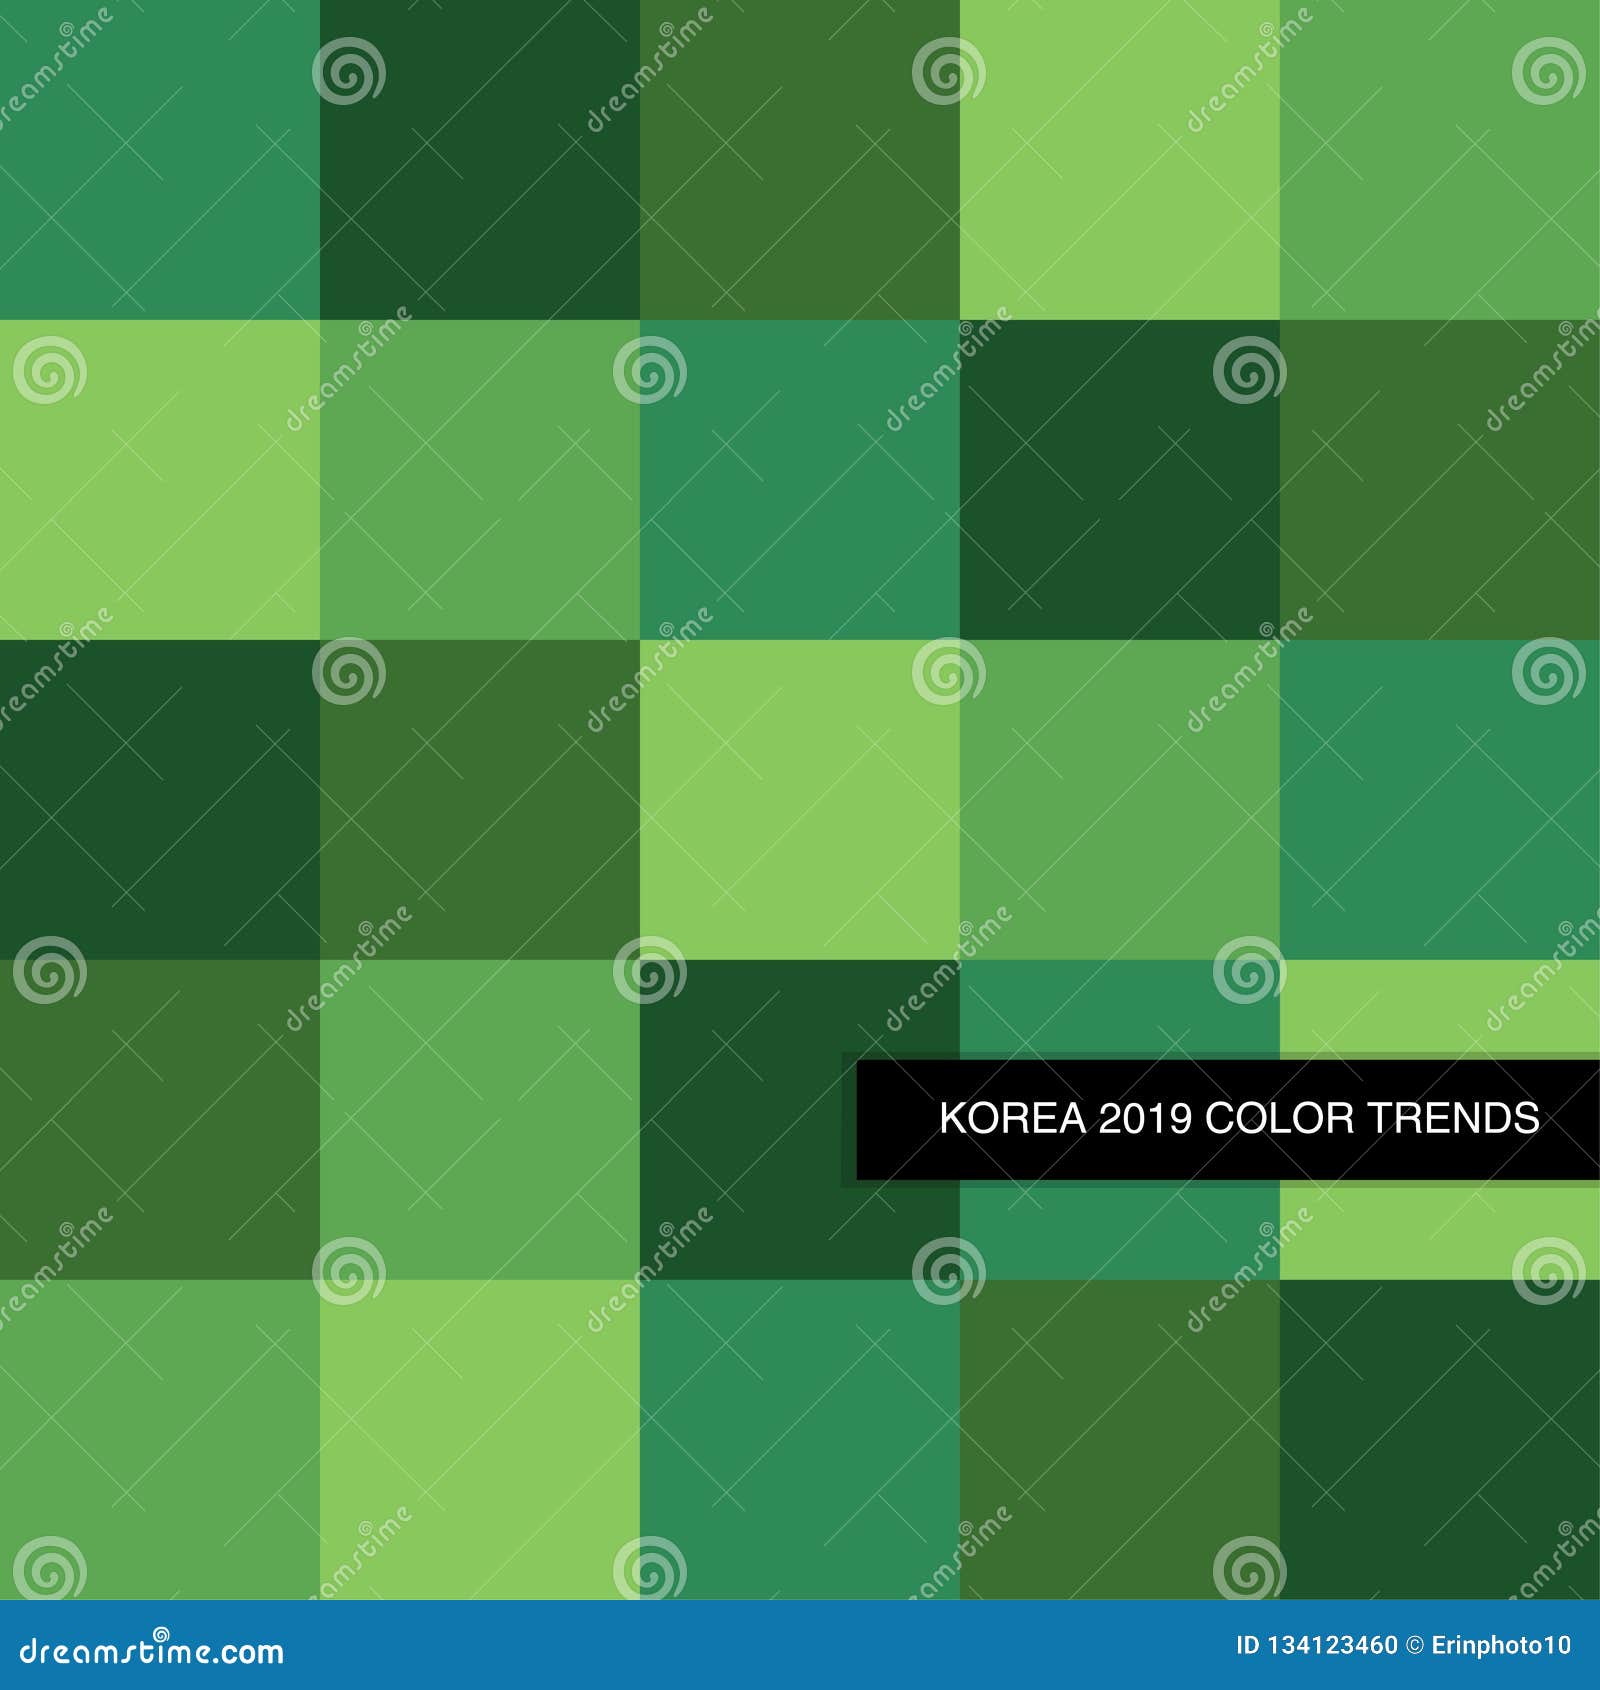 Trendy Forest Green 2019 Color Palette As Abstract Seamless Background  Stock Vector - Illustration of paint, modern: 134123460